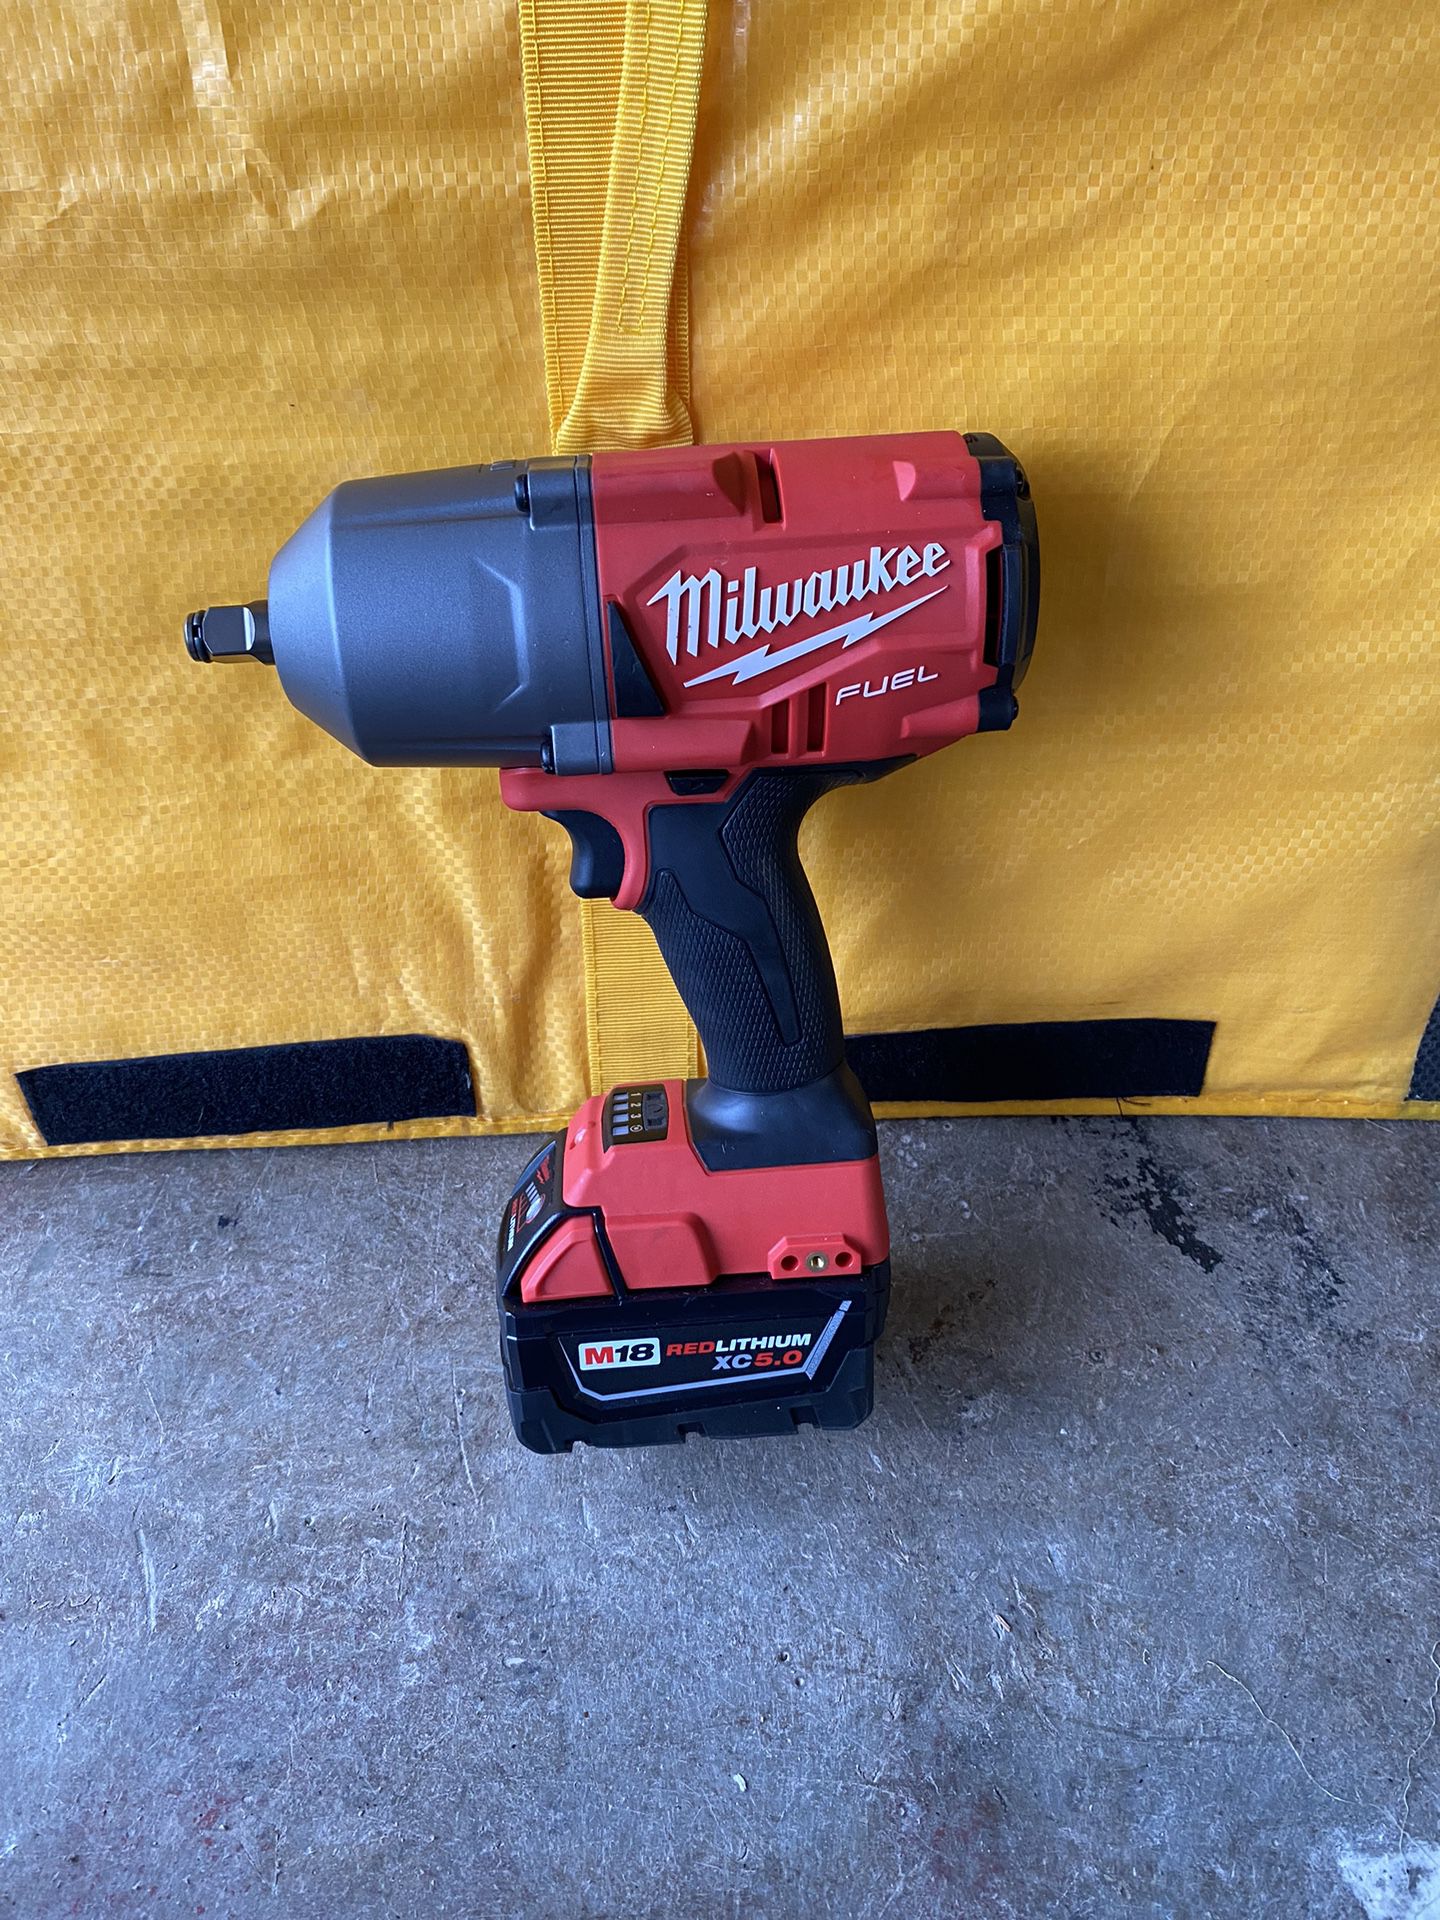 Milwaukee, 18 V half-inch impact wrench with 5.0 battery.